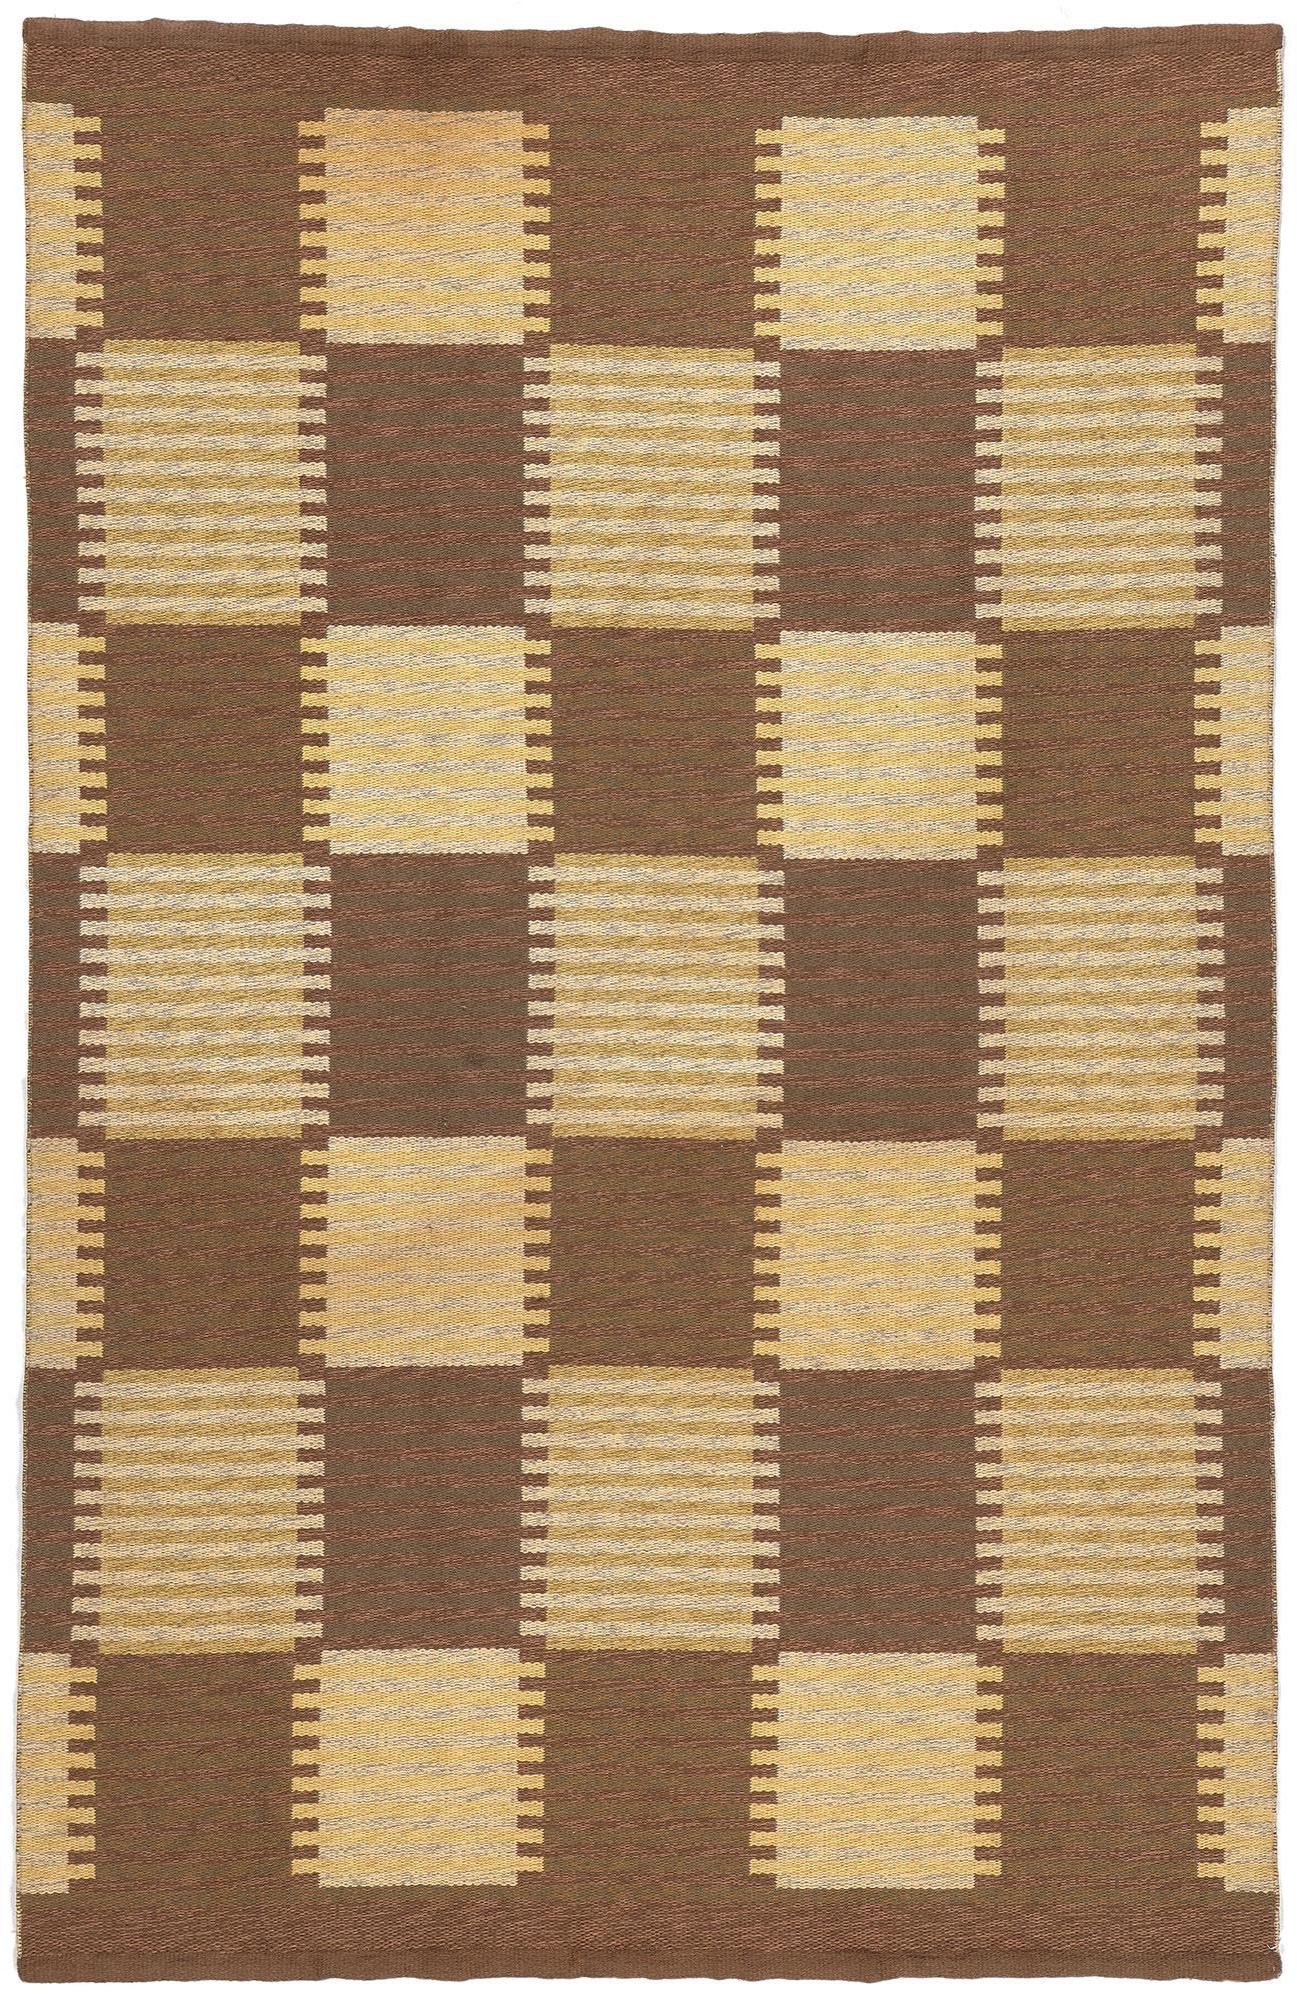 78609 Vintage Swedish Rollakan Kilim Rug, 06'02 x 09'07. Designed for a lifestyle of simplicity and minimalism, this handwoven vintage Swedish rollakan rug cultivates a desire for balance and calm. The check stripe design and earthy colorway woven